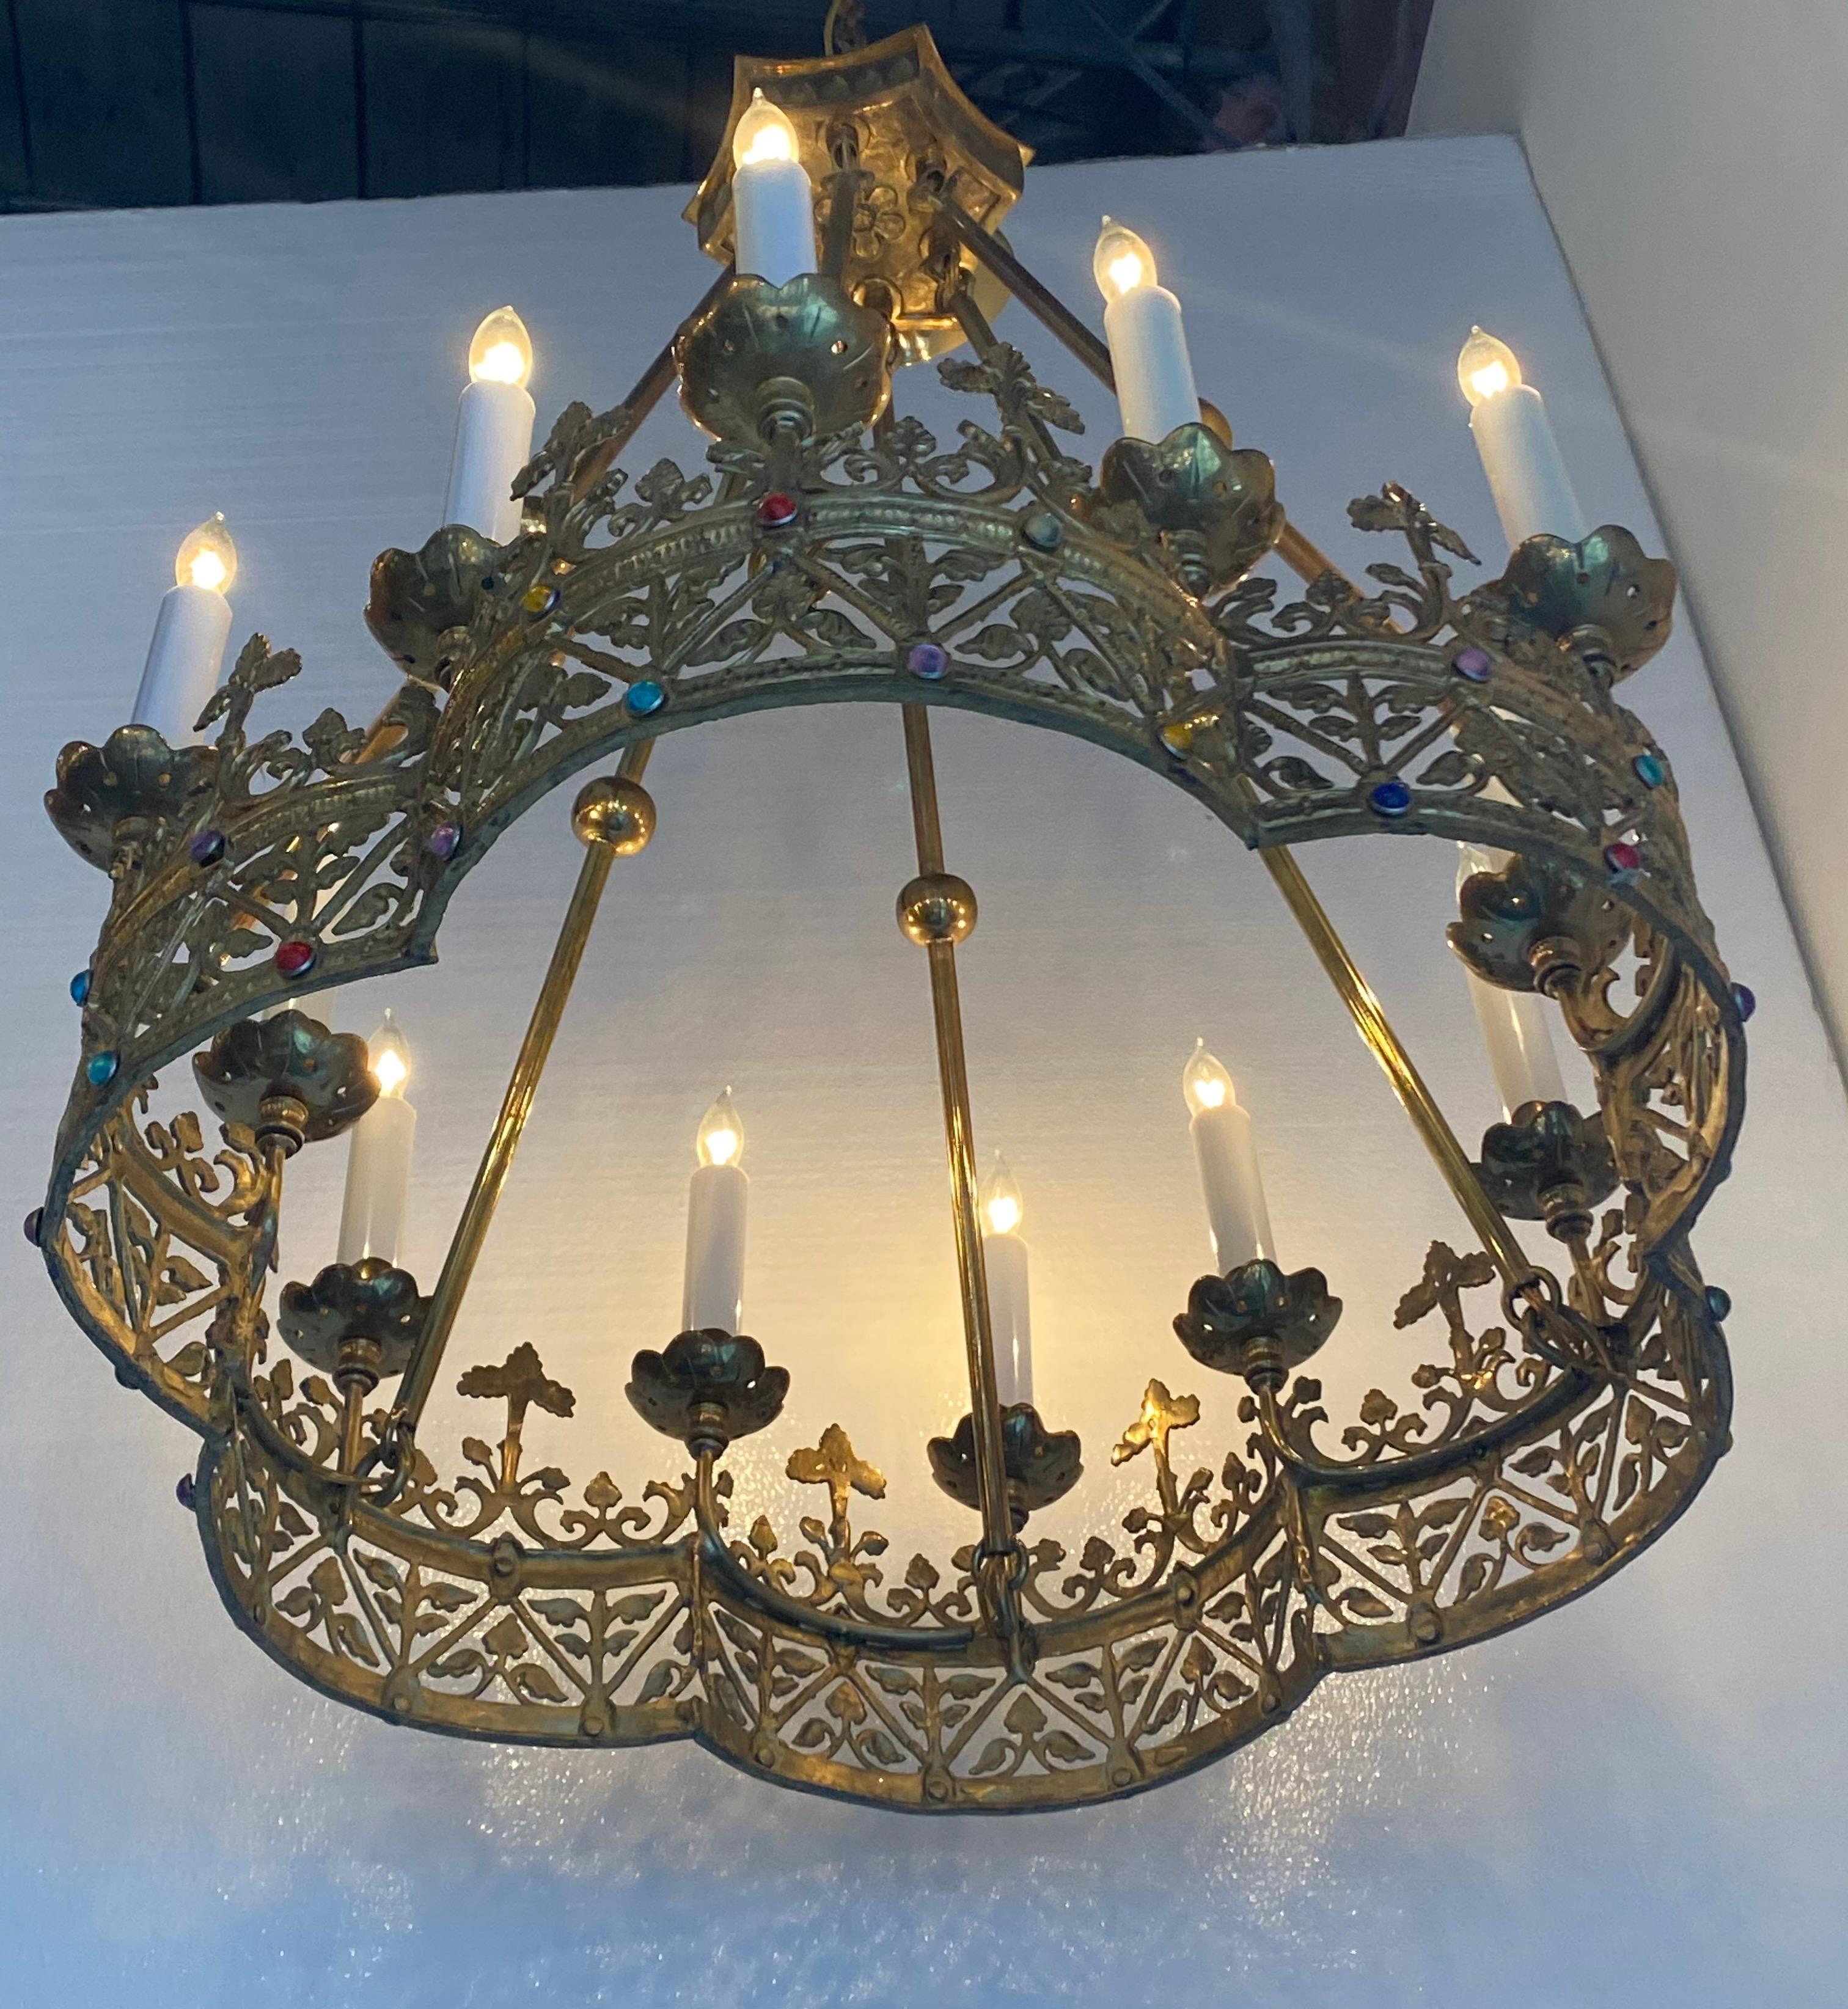 Crown bronze chandelier, Unique from France with multi-color crystals around, 12 lights, 12-4